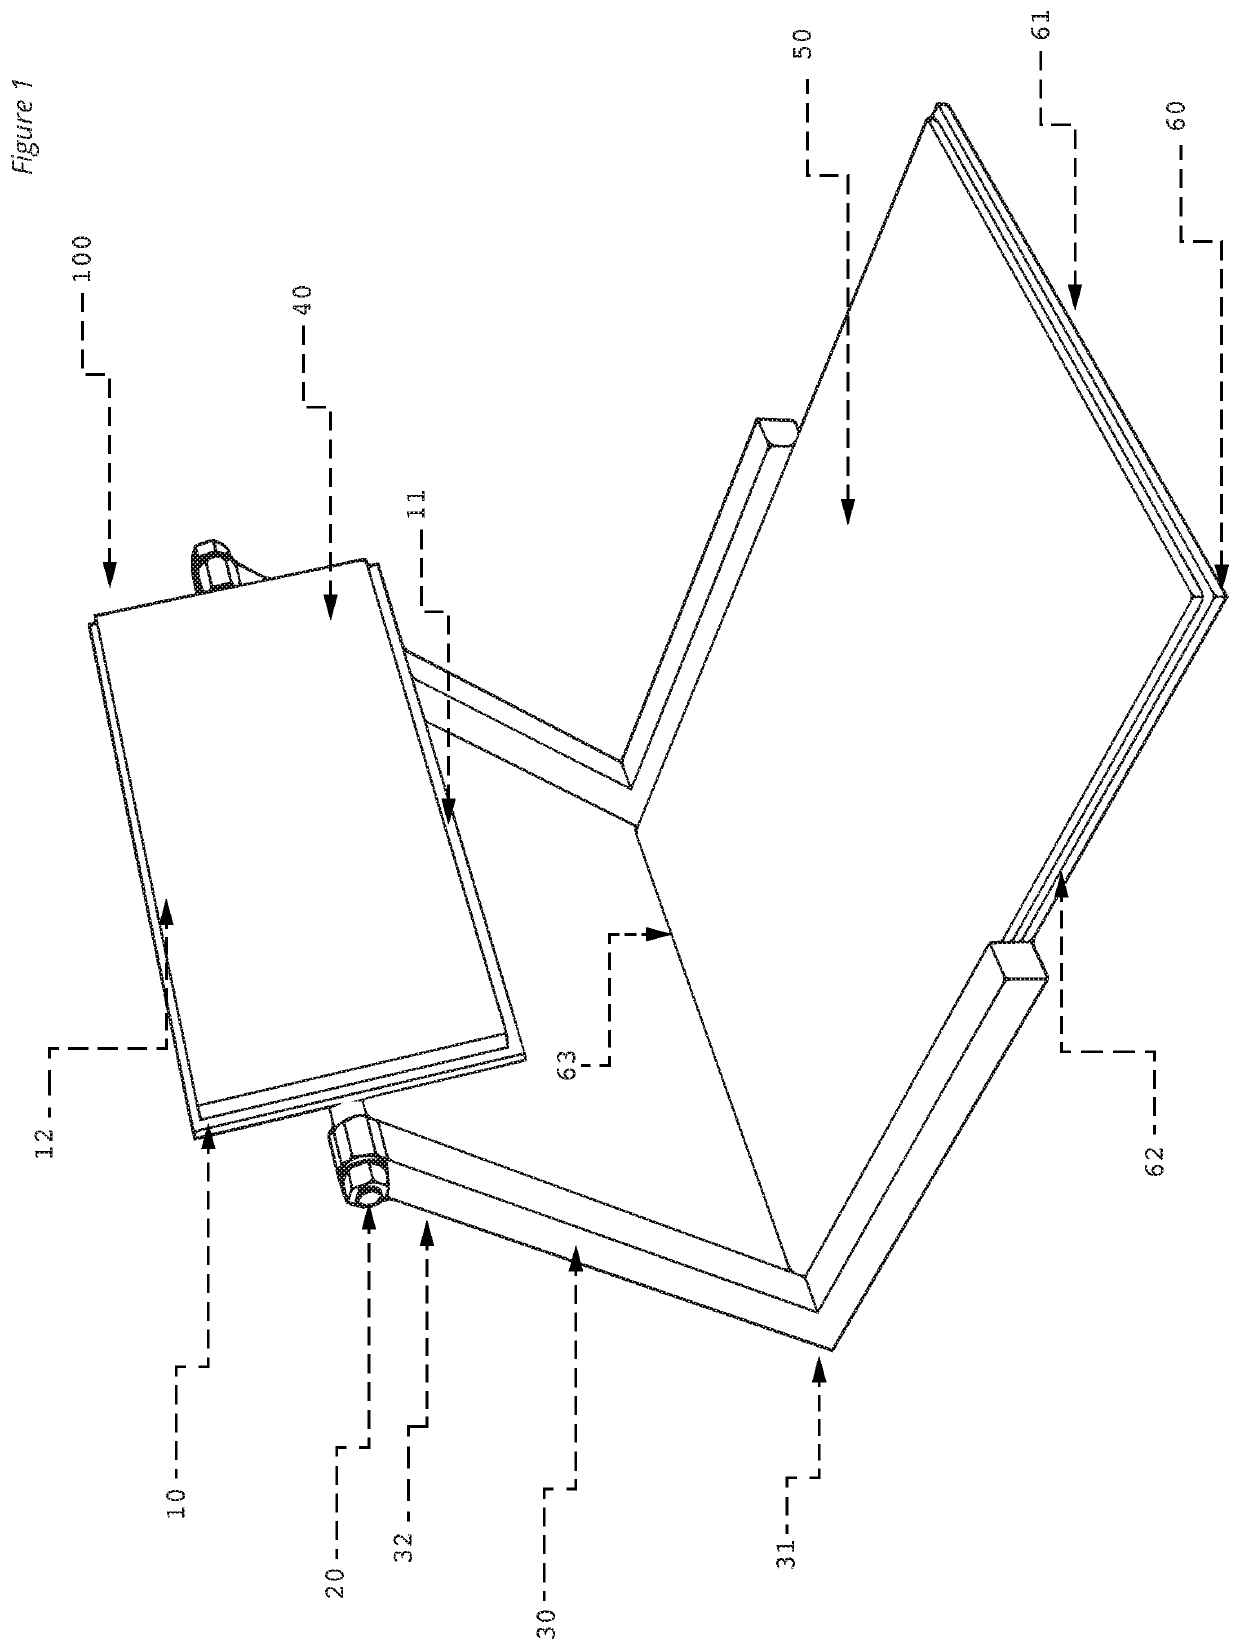 Assistive device for standing tasks